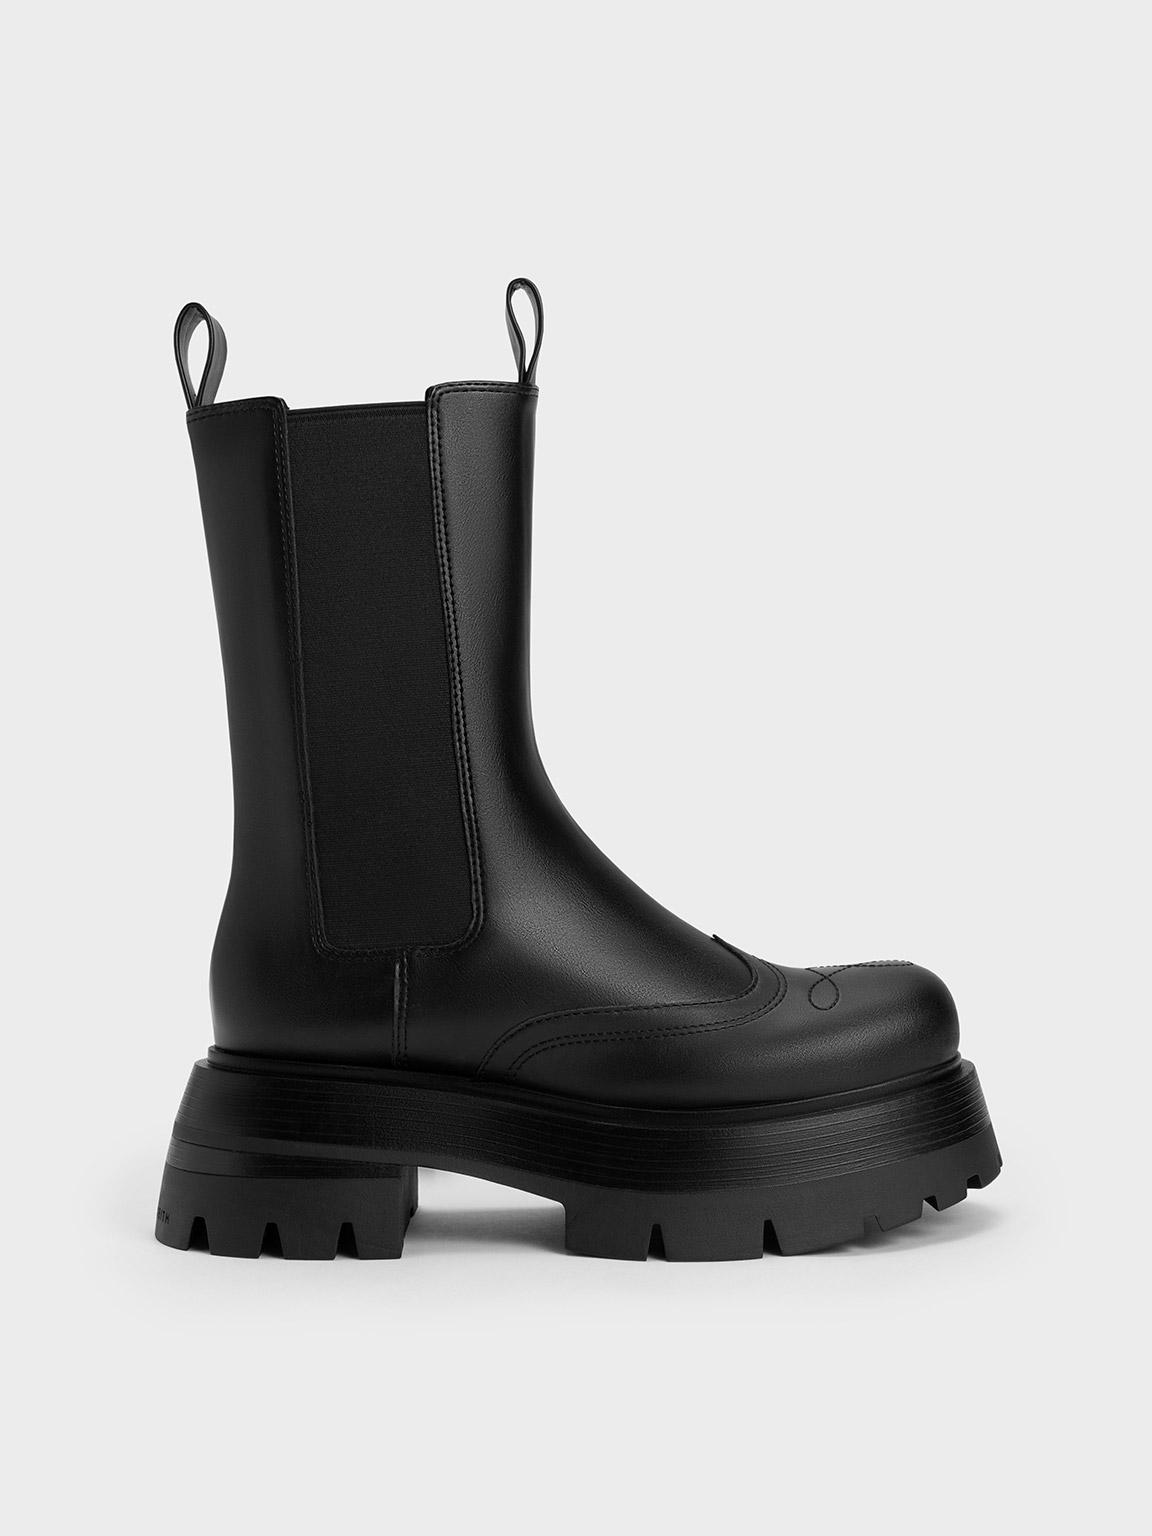 Charles & Keith Lenox Stitch-trim Chelsea Boots in Black | Lyst